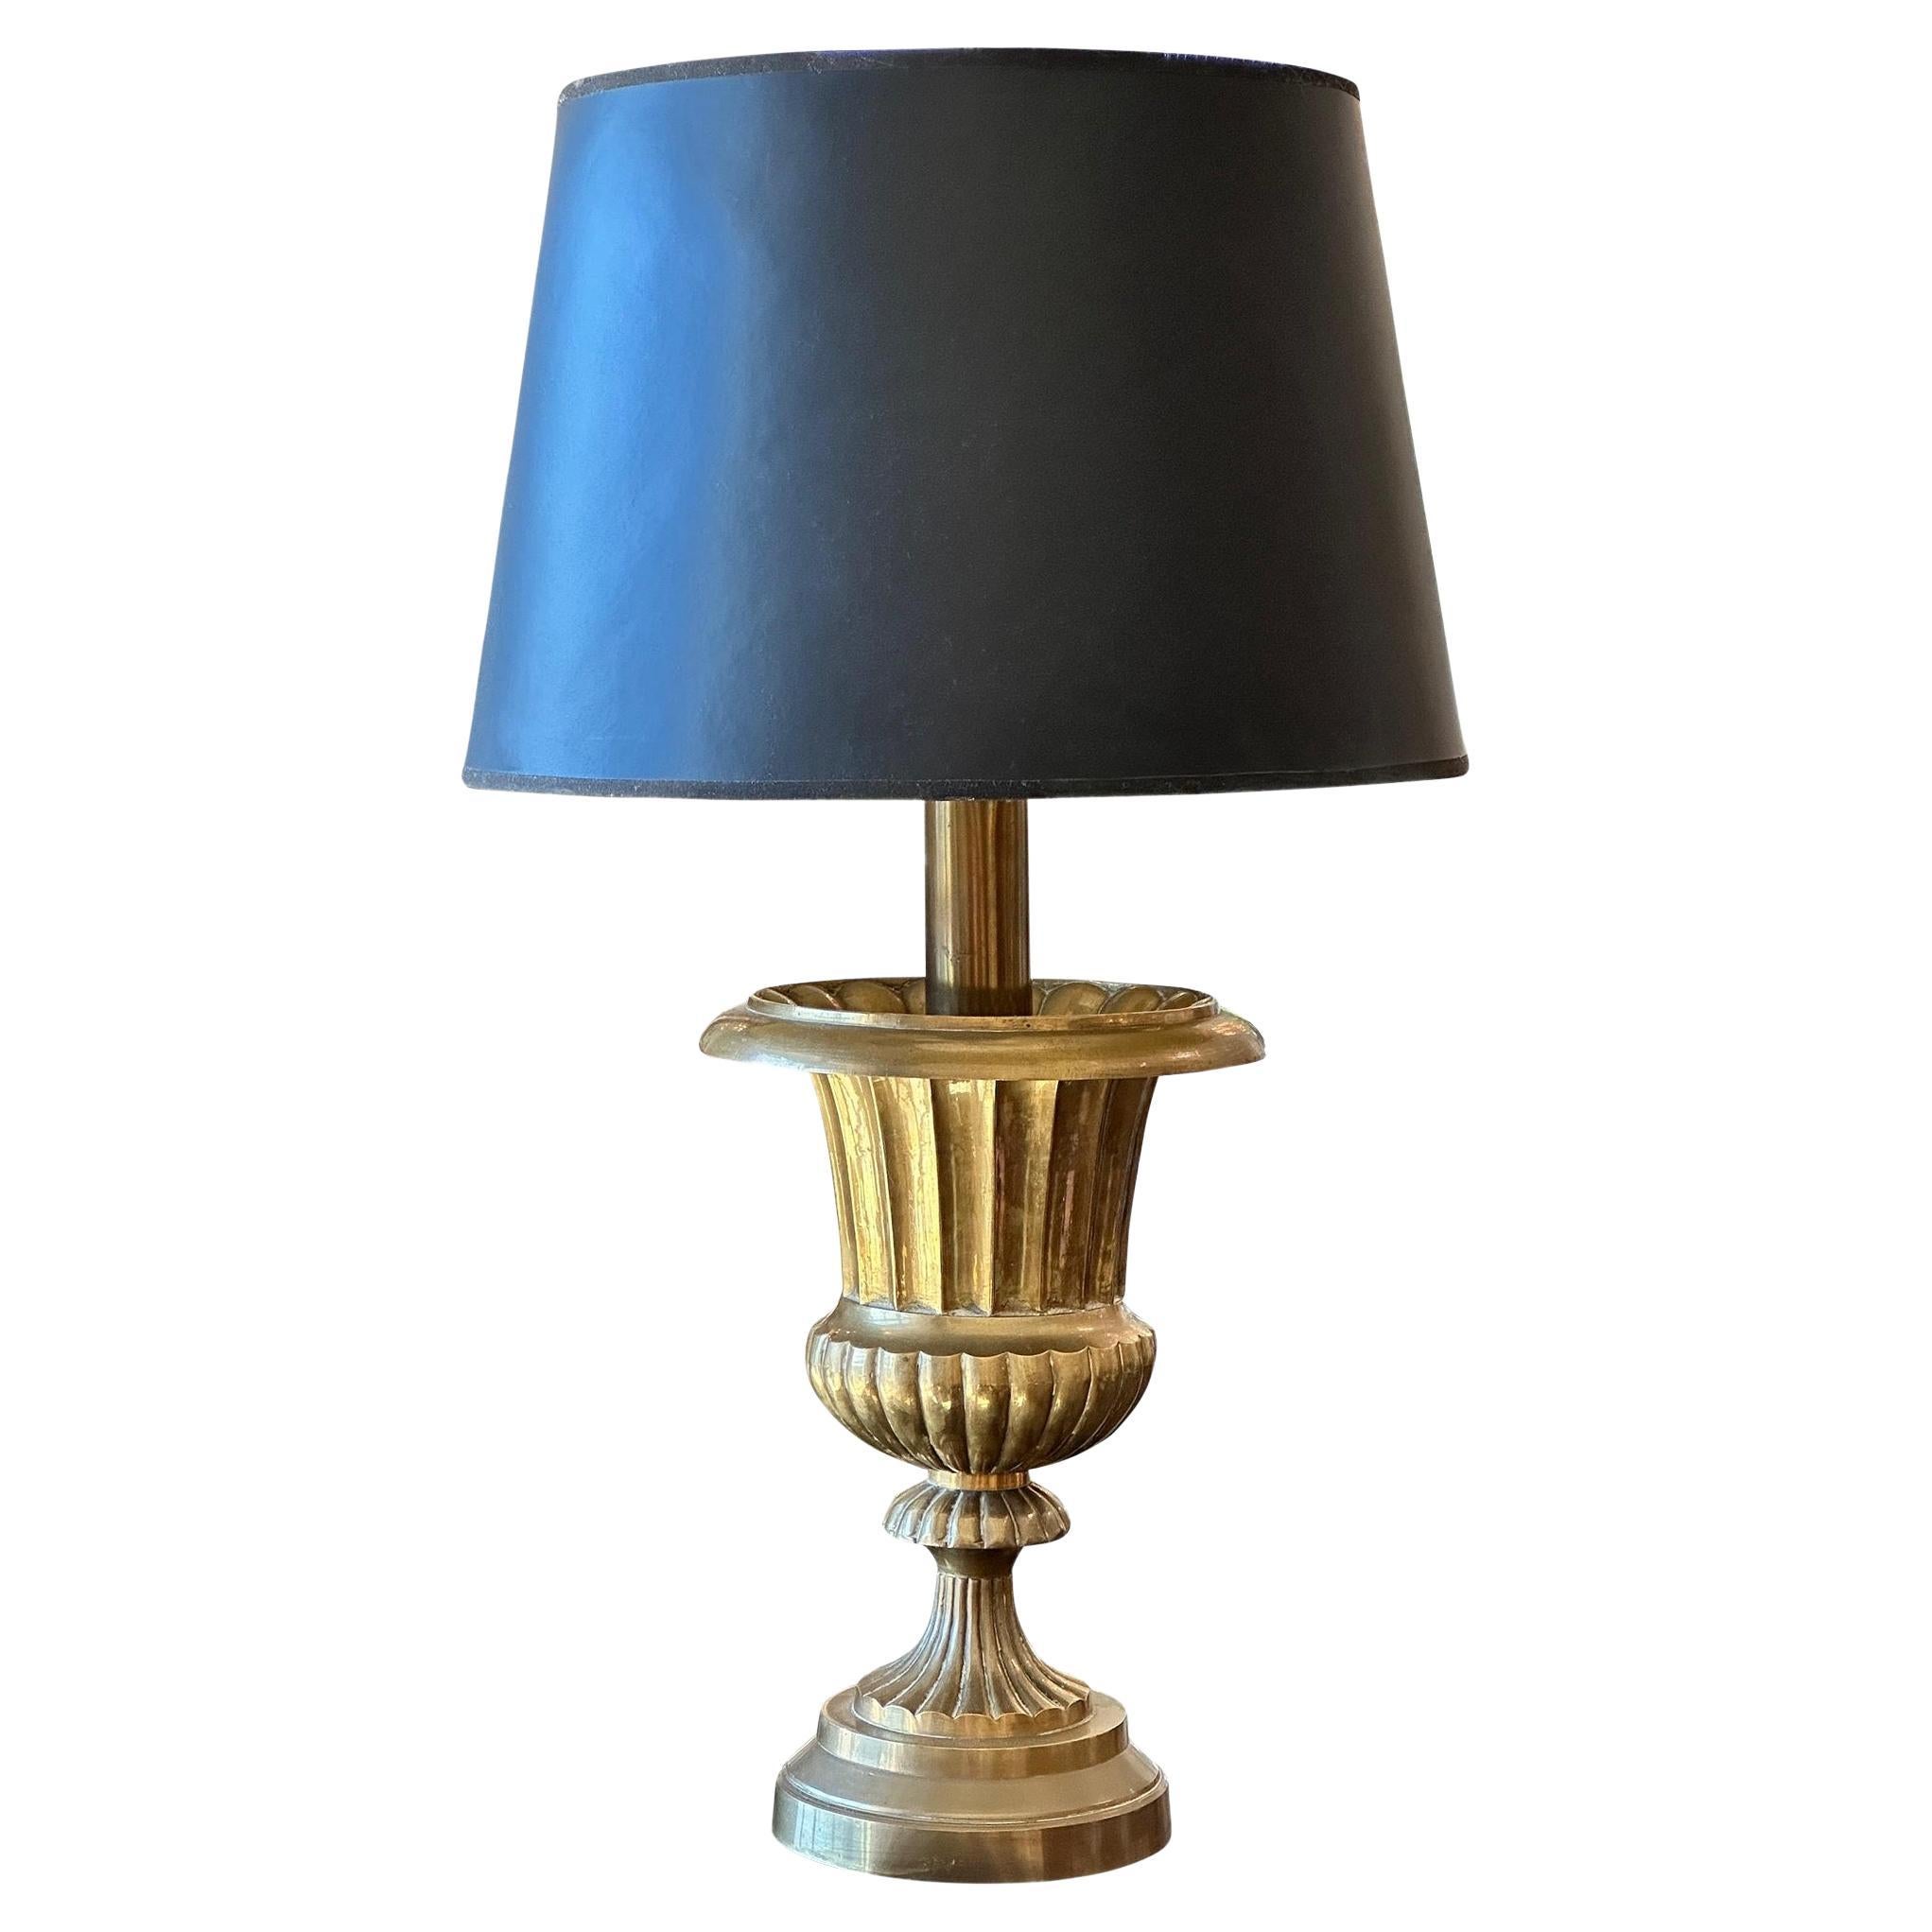 Vintage Mid 20th Century Brass Urn Lamp For Sale